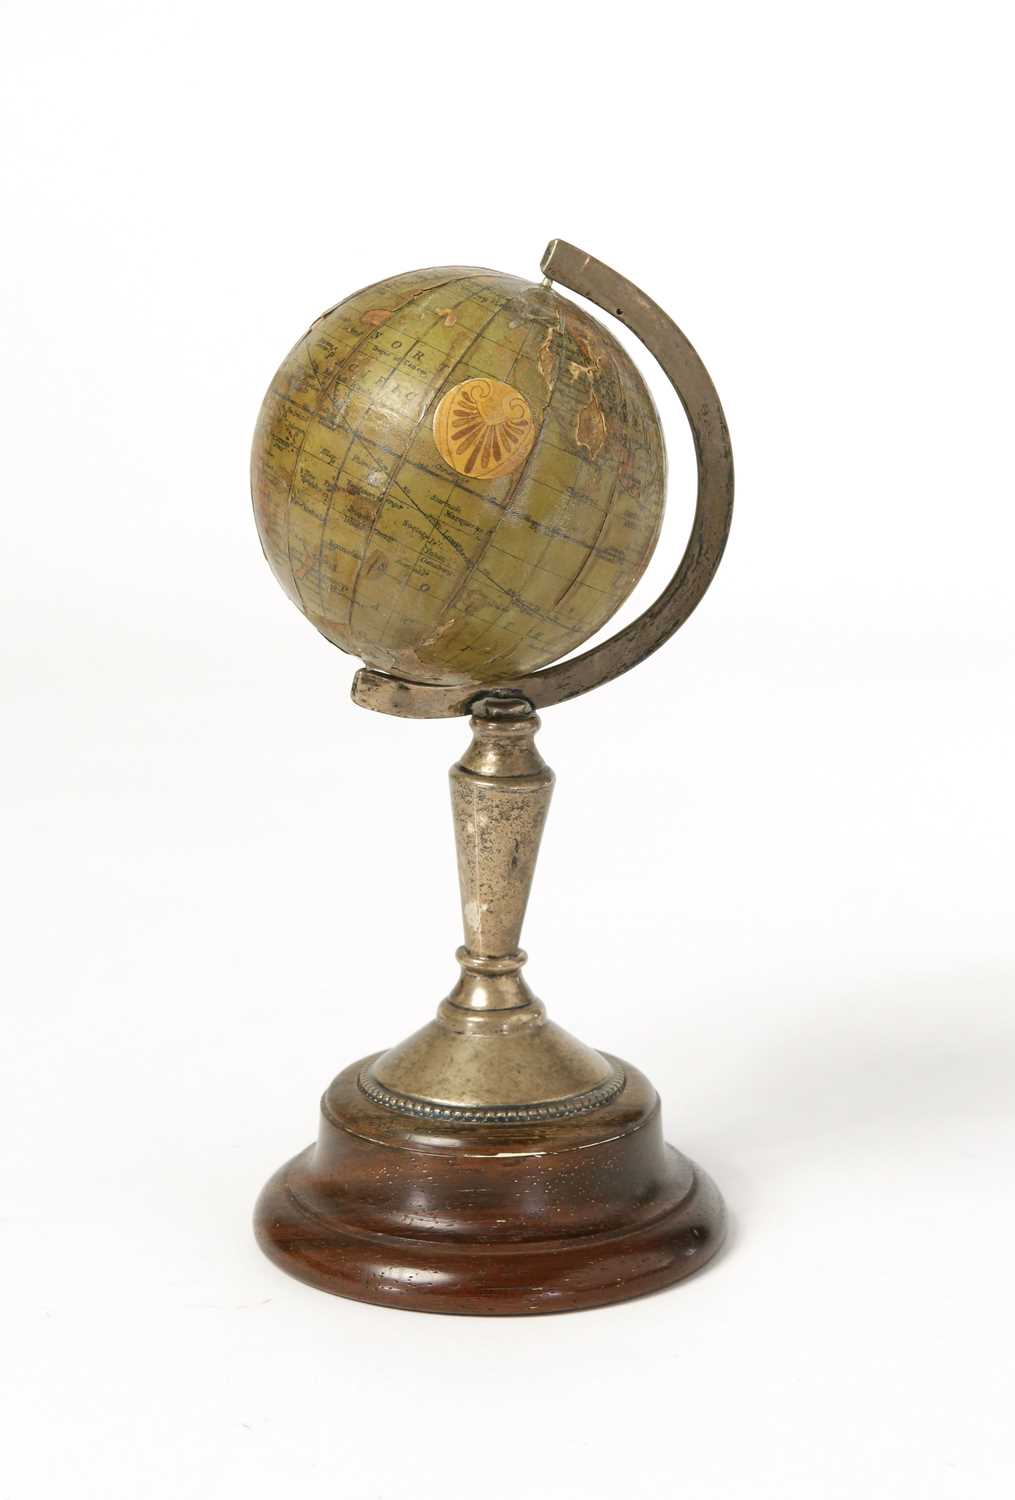 Lot 217 - A Small Globe on Silver Stand, Ca 1900.